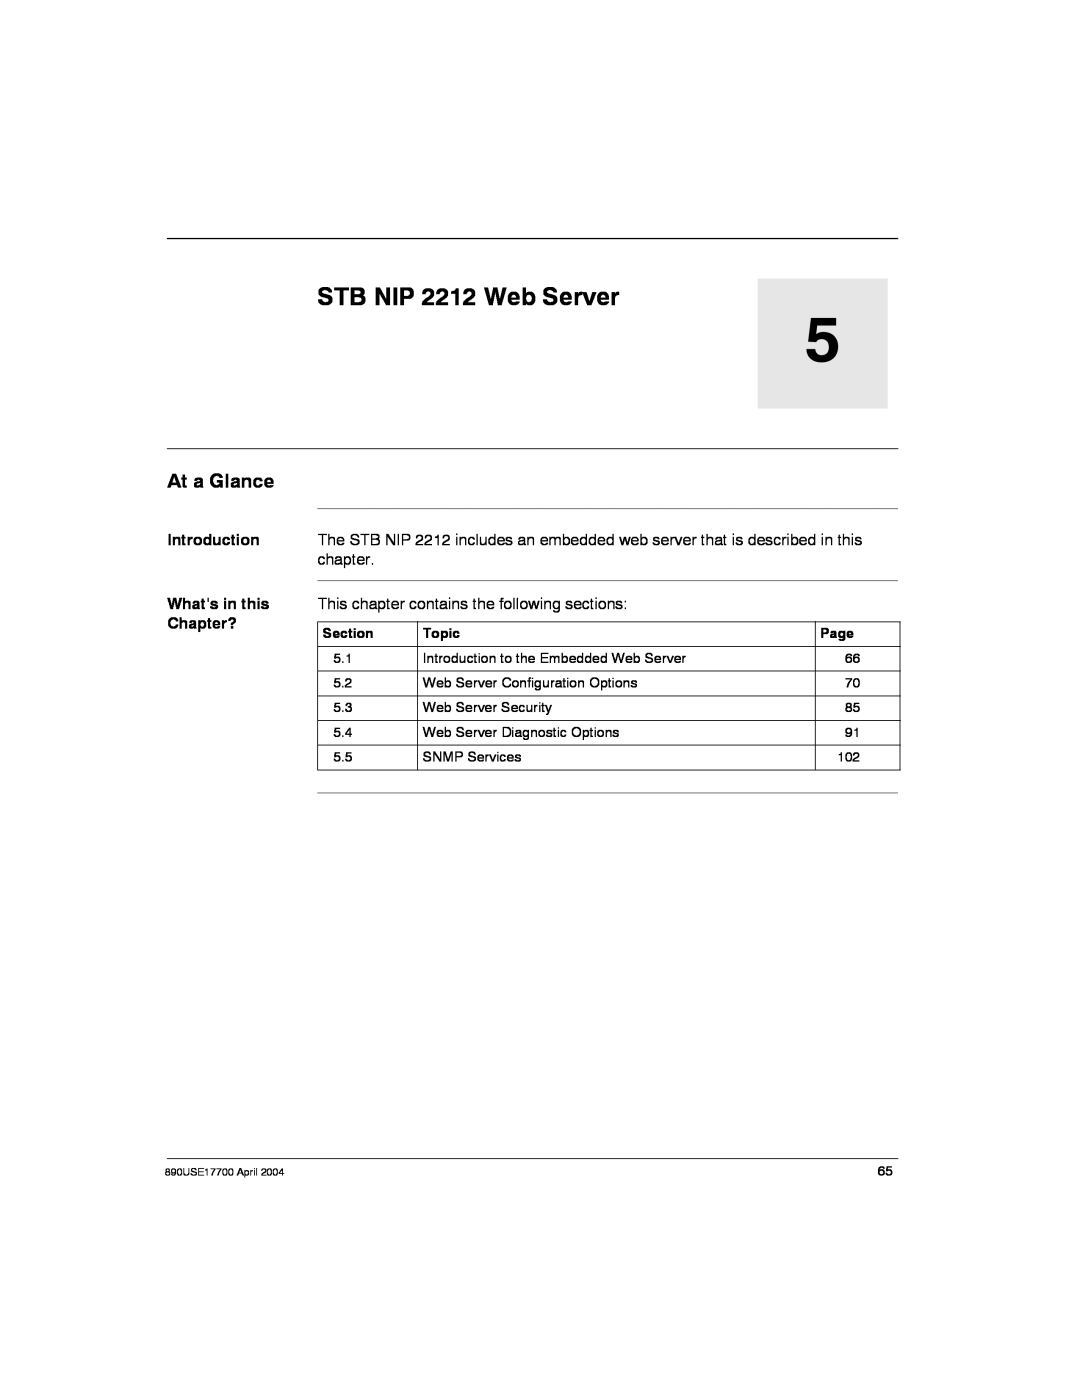 Schneider Electric 890USE17700 manual STB NIP 2212 Web Server, At a Glance, This chapter contains the following sections 